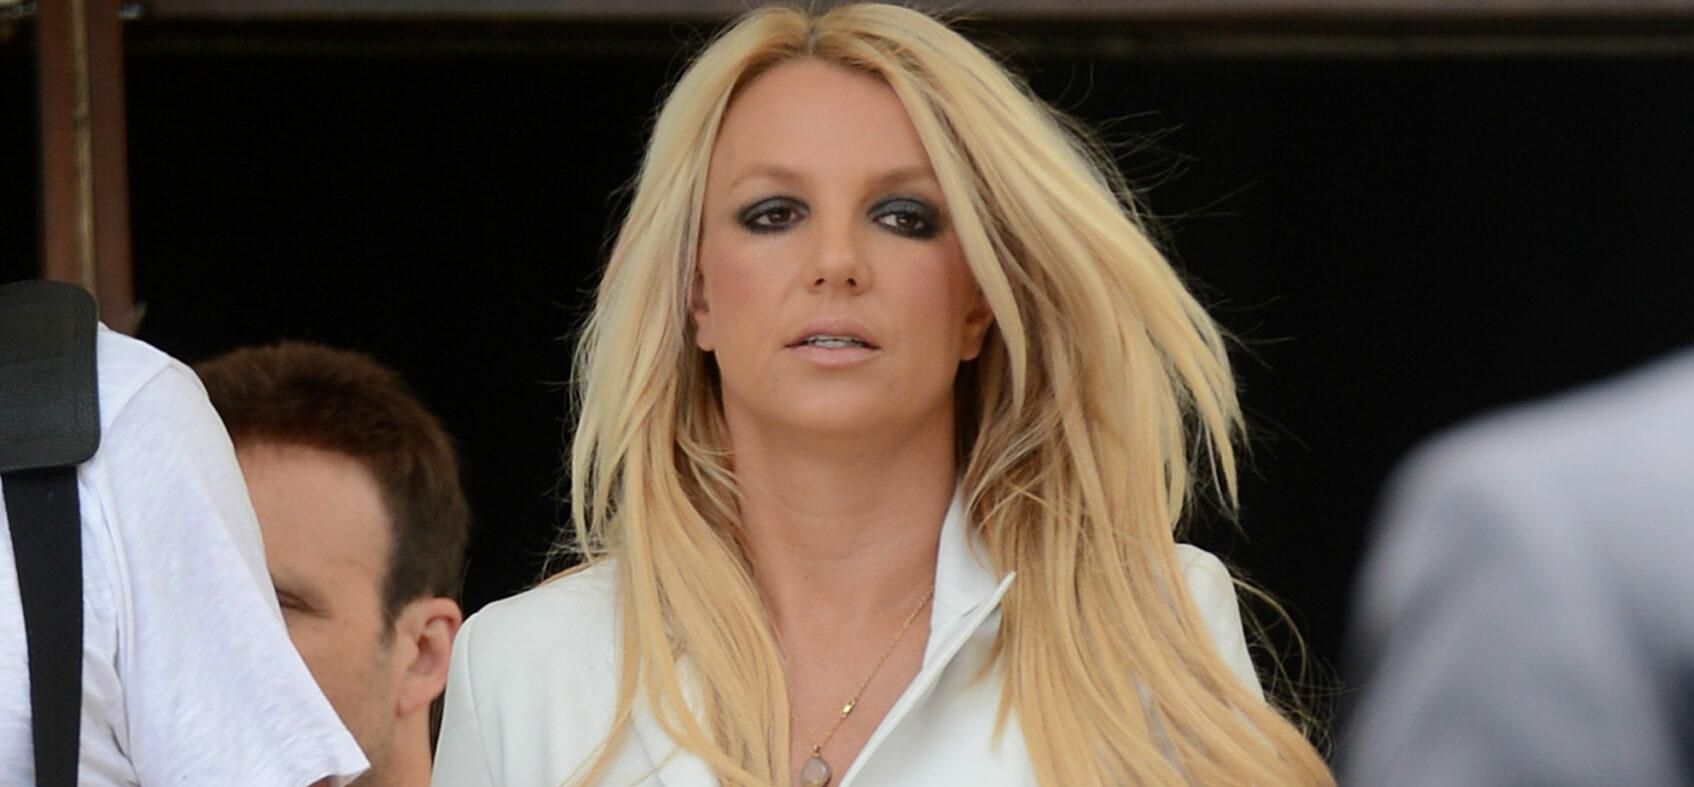 Britney Spears Conservatorship Hearing: Public Prohibited From Filming, Will NOT Be Broadcast